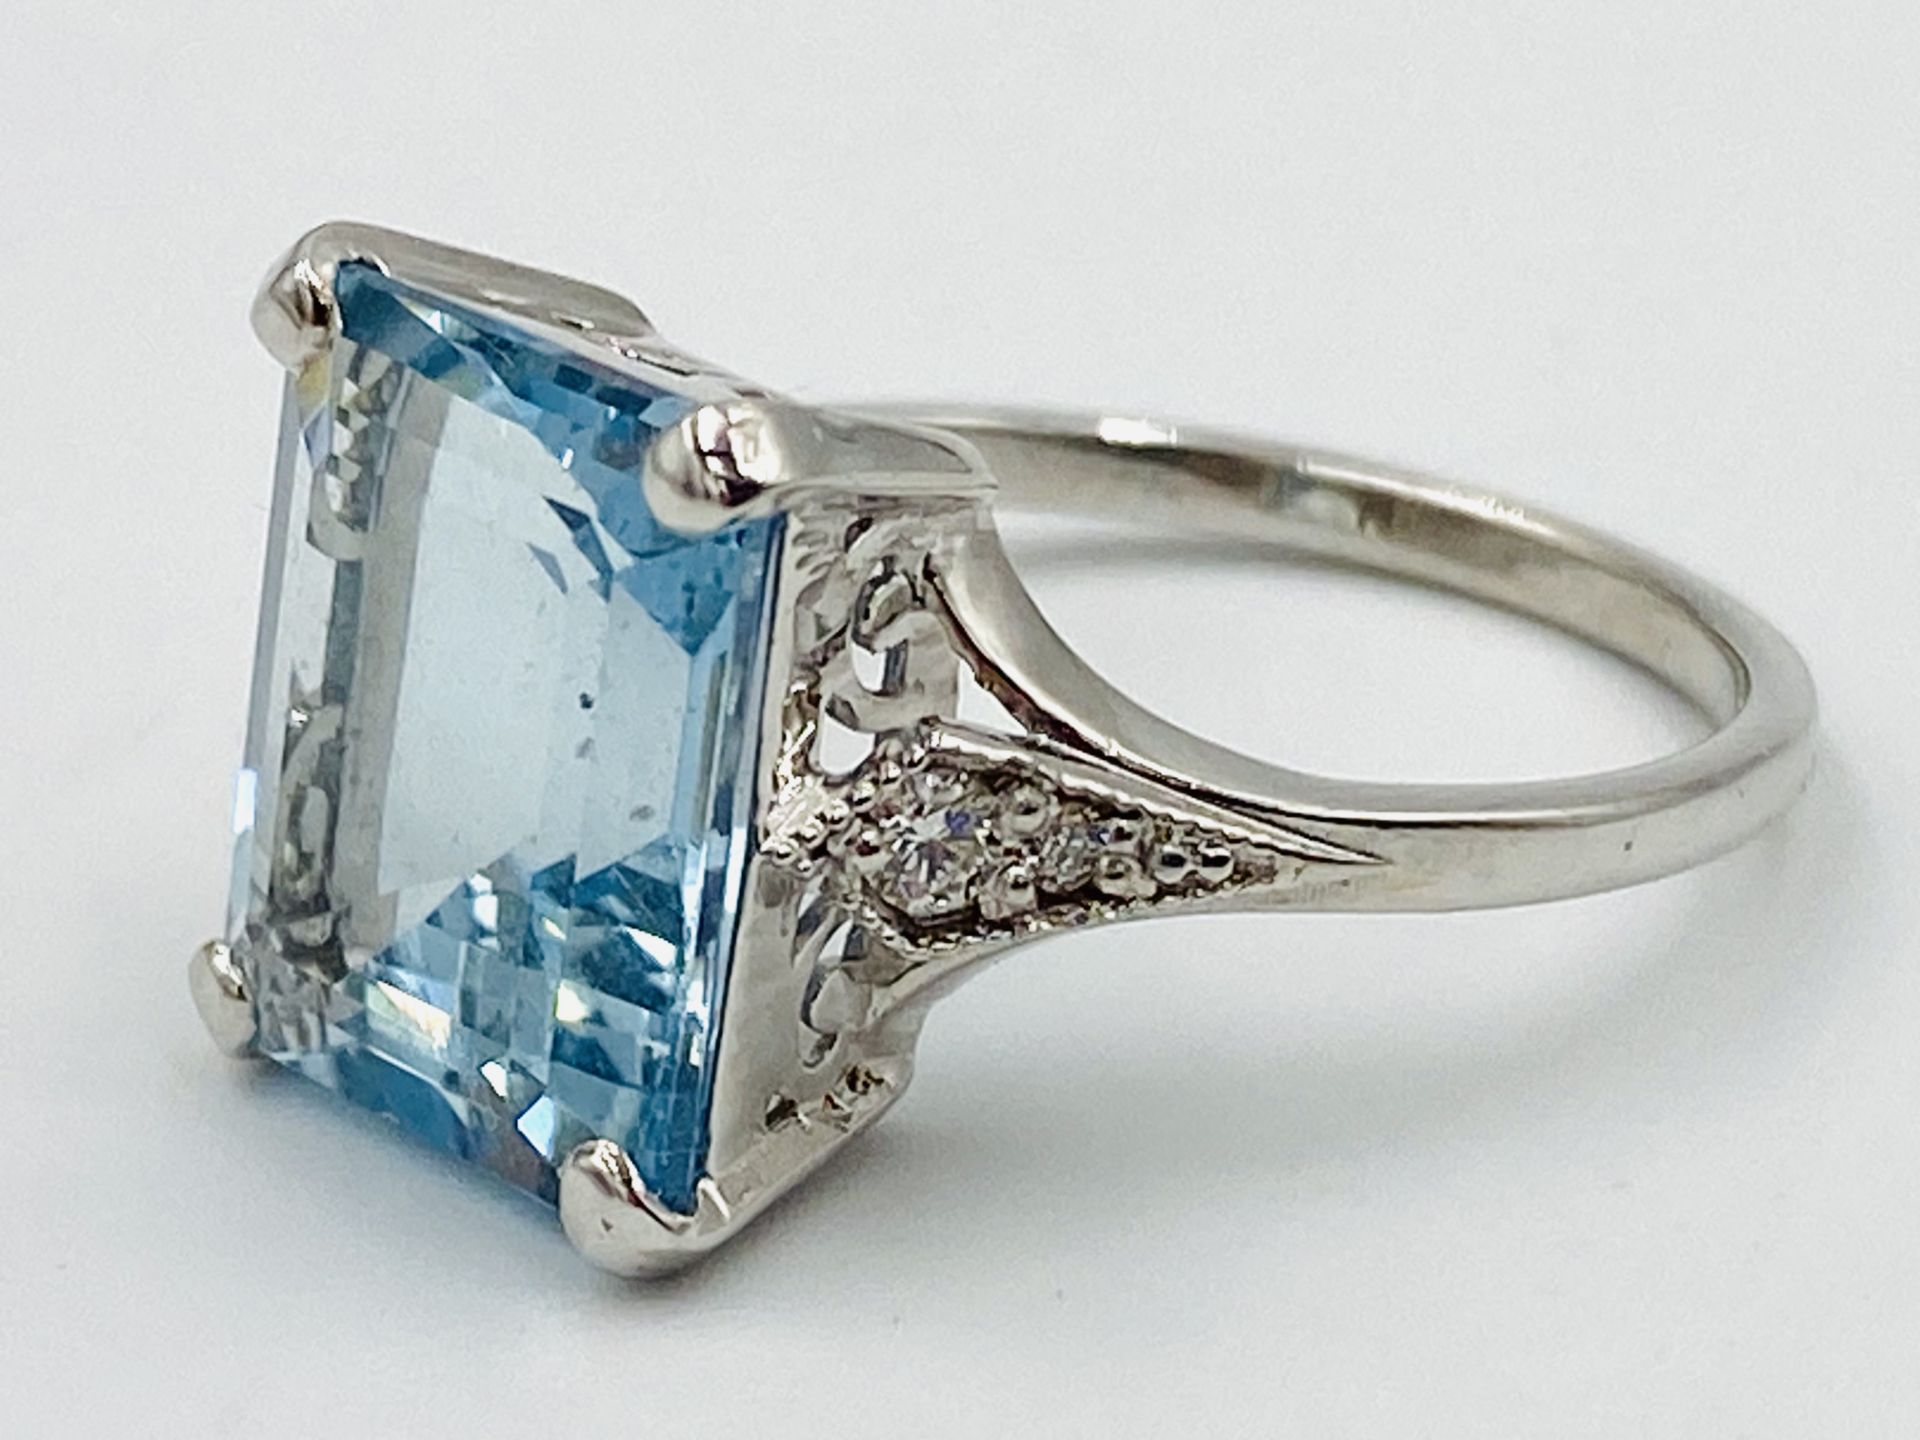 18ct white gold aquamarine ring with diamond shoulders - Image 2 of 5